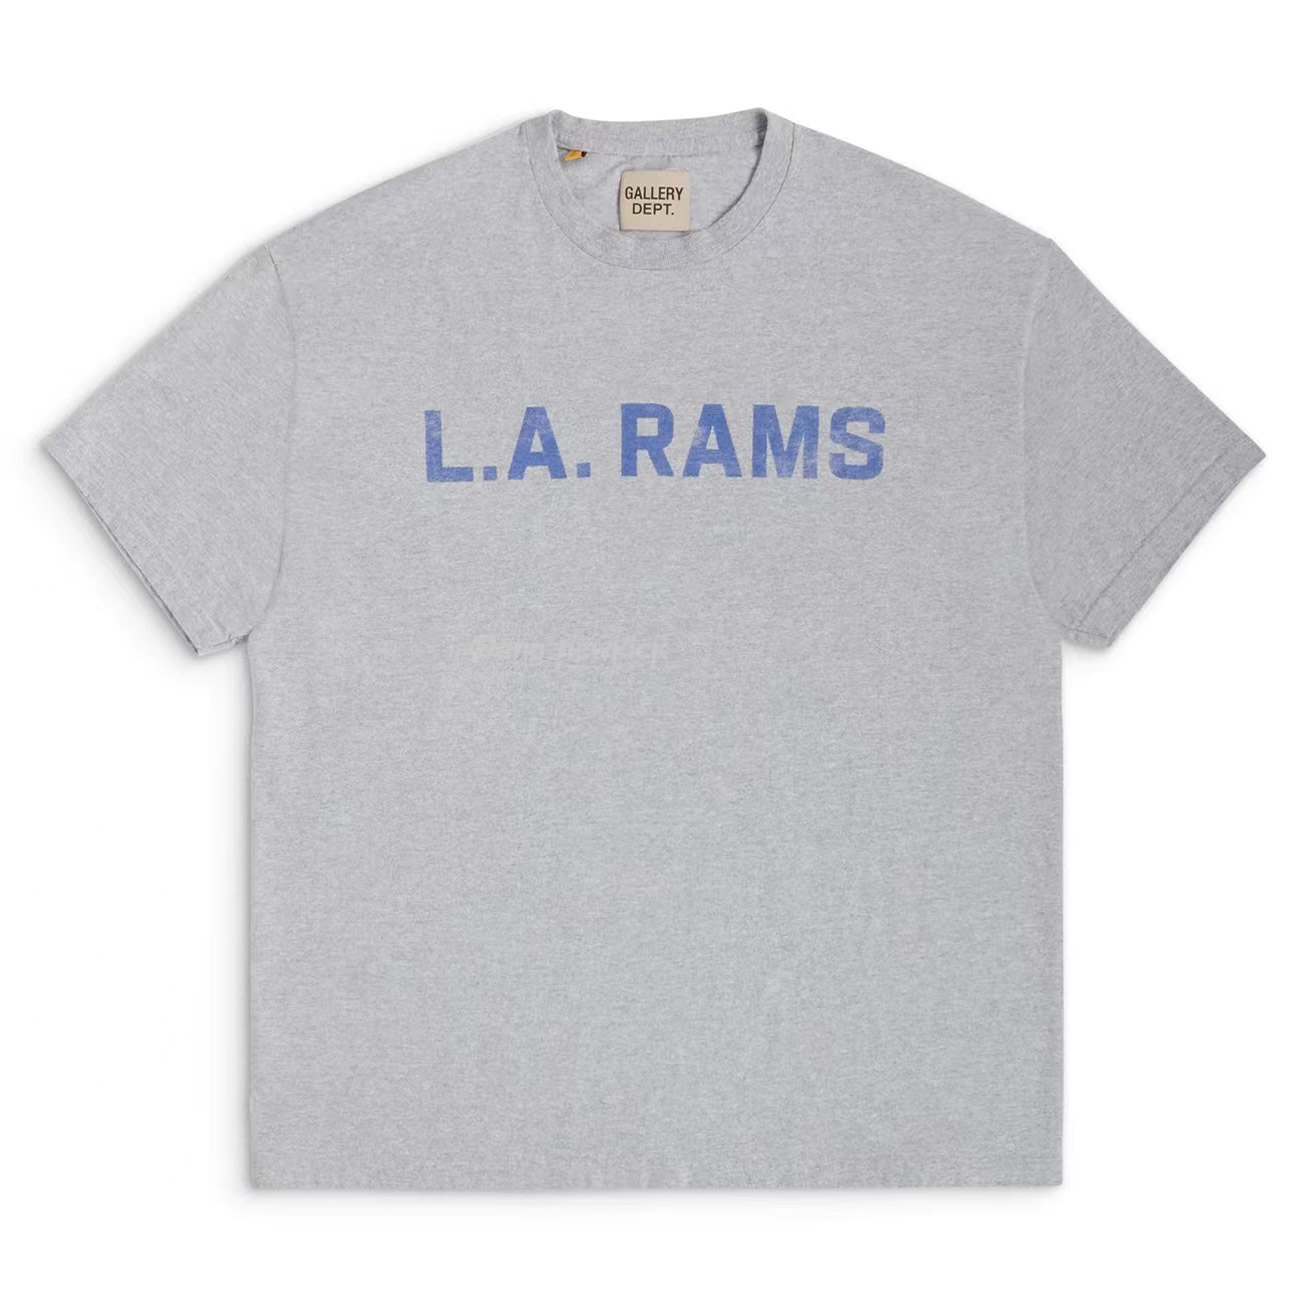 Gallery Dept X La Rams Color Block Tee Rams Co Branded Old Print Contrast Short Sleeve T Shirt (5) - newkick.org